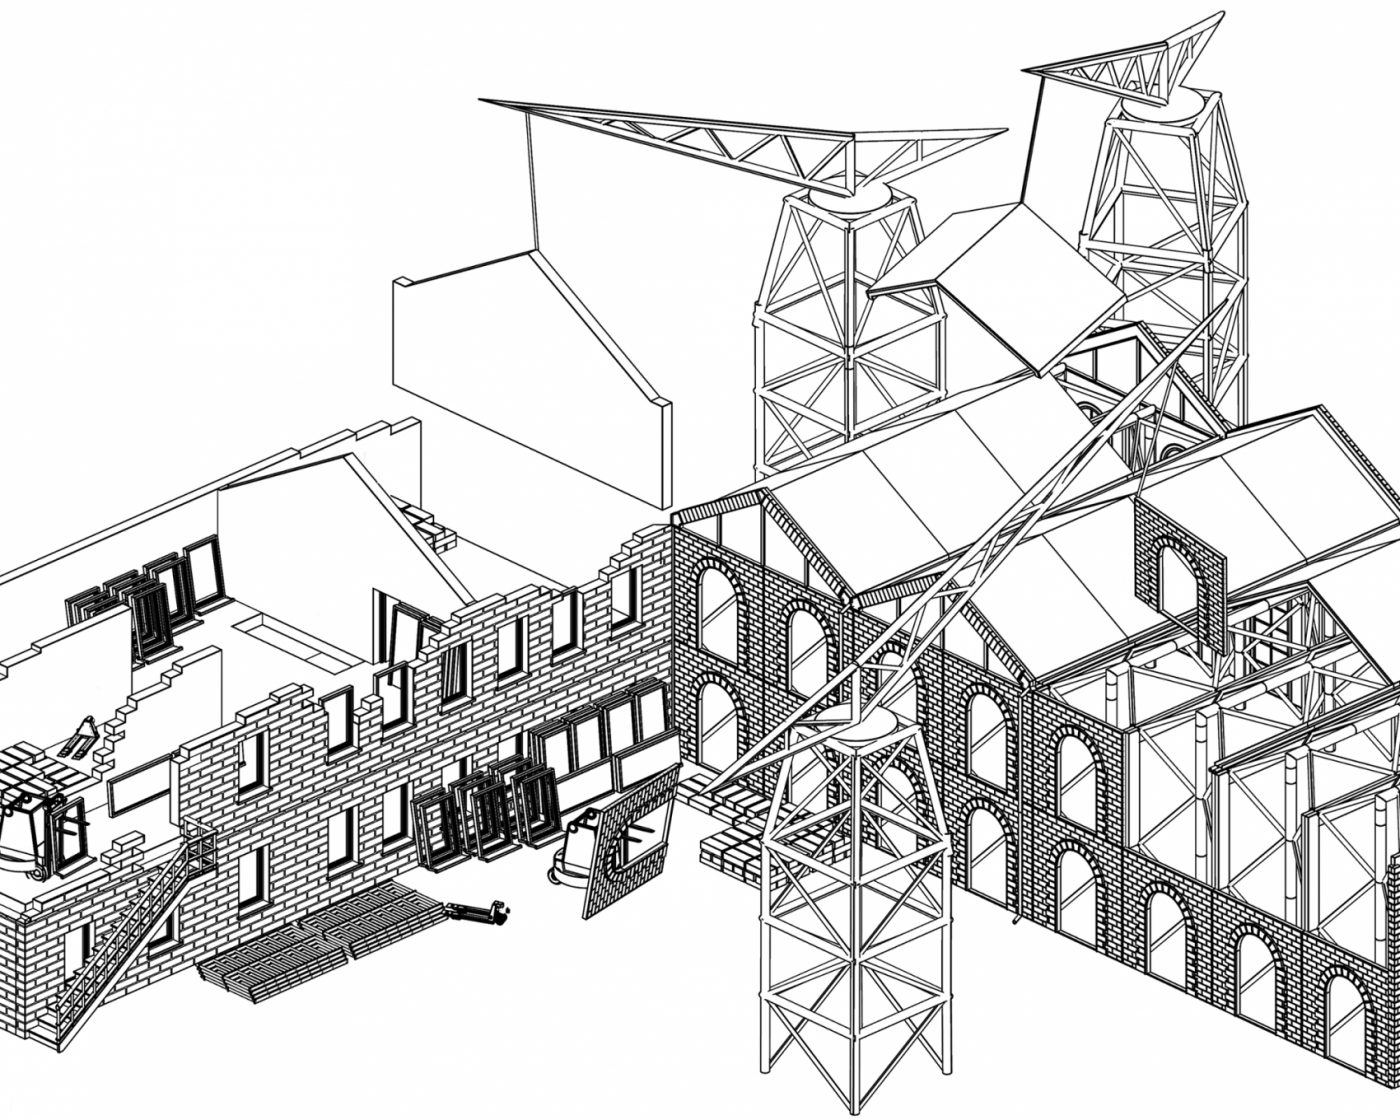 An axonometric drawing of the Archiving Architecture proposal showing architectural elements coming together on site.